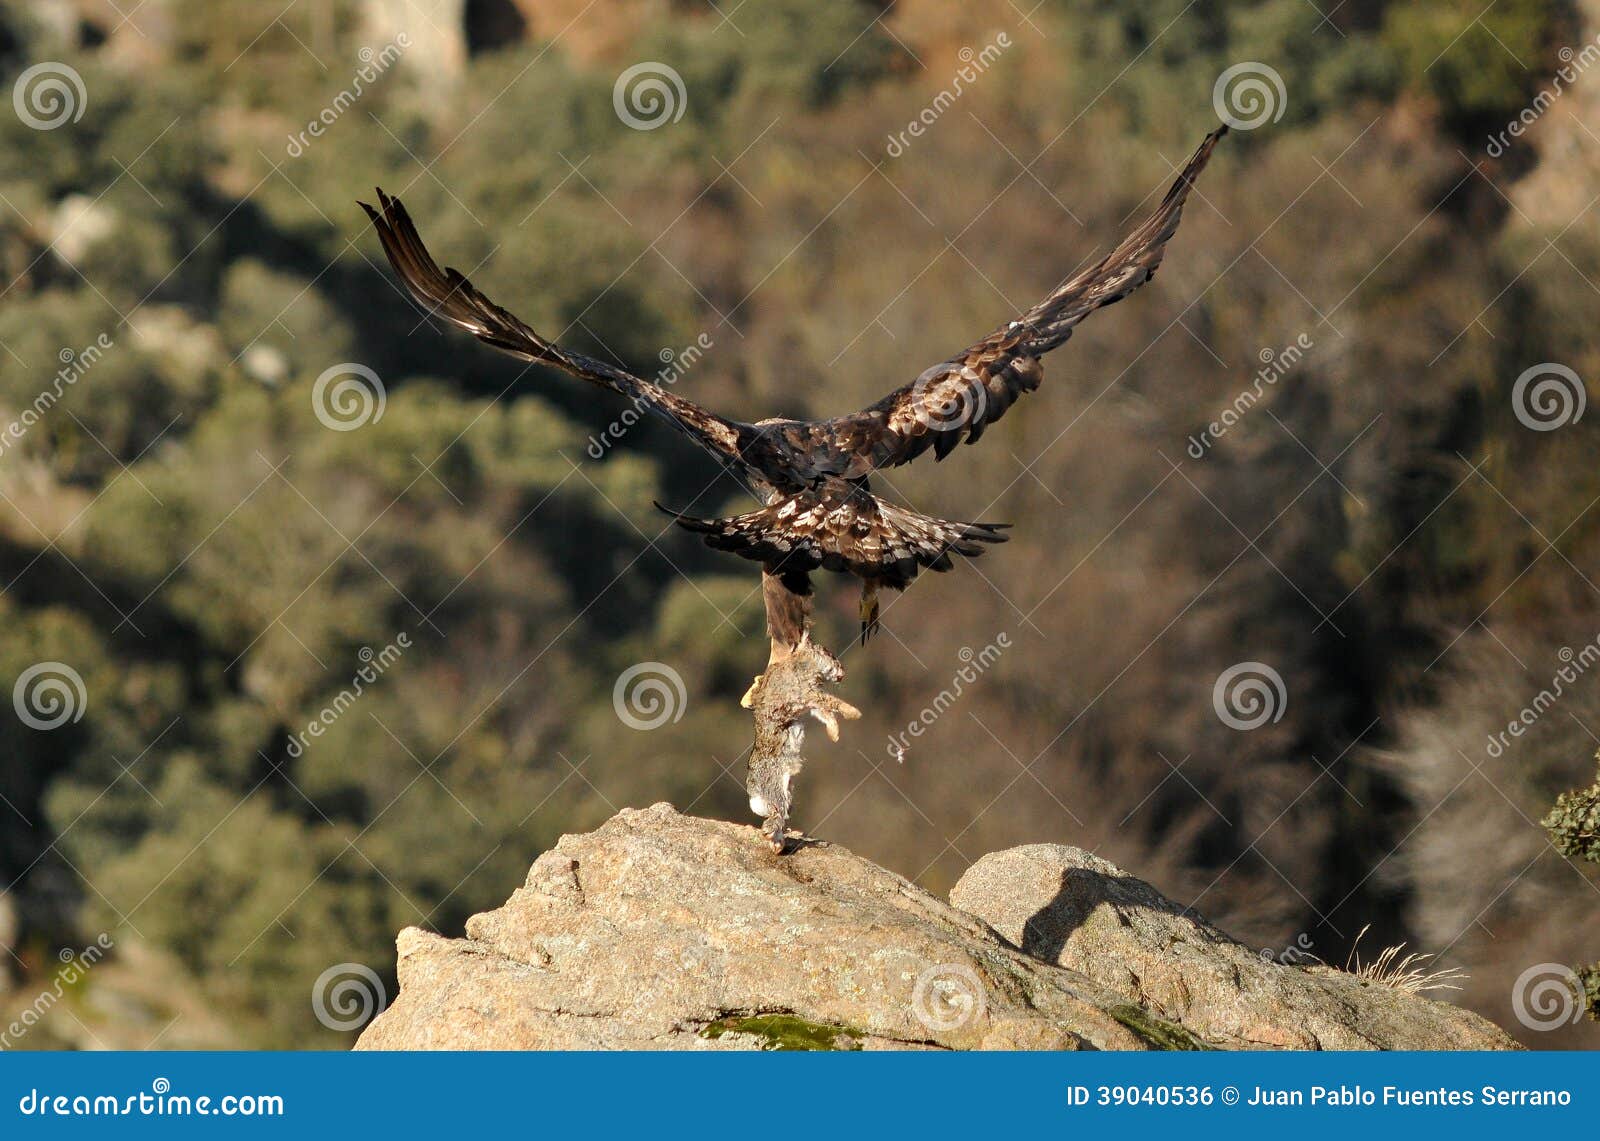 golden eagle prey is carried in the claws